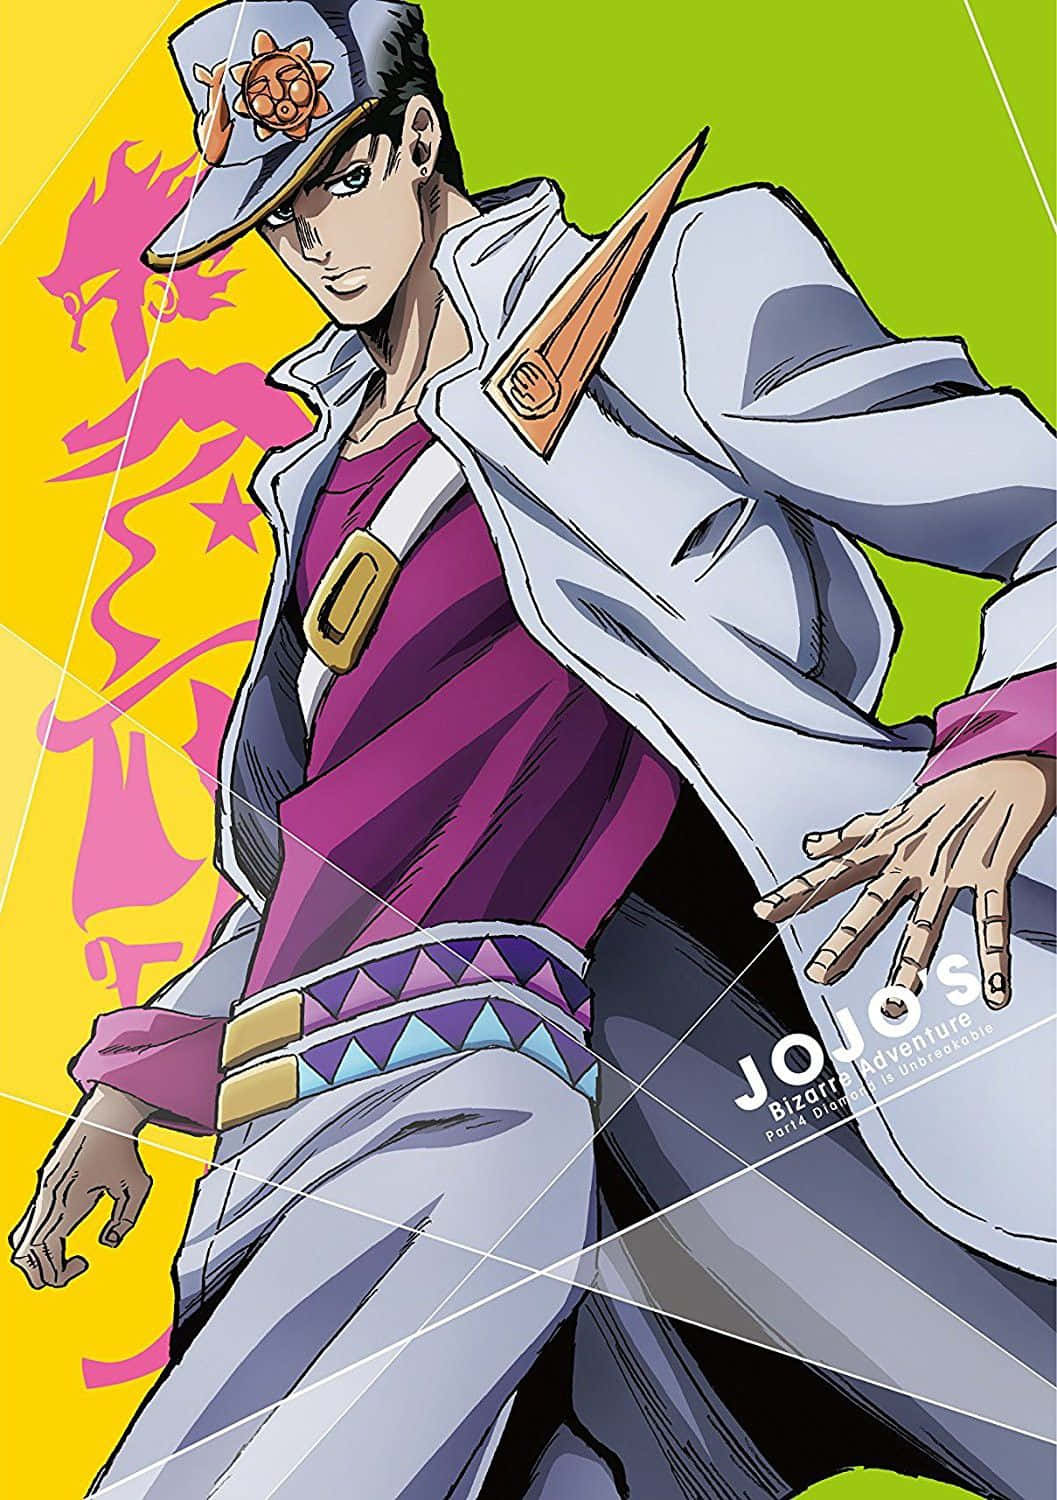 Jotaro stands proudly, with the strength of his conviction driving him forwards.